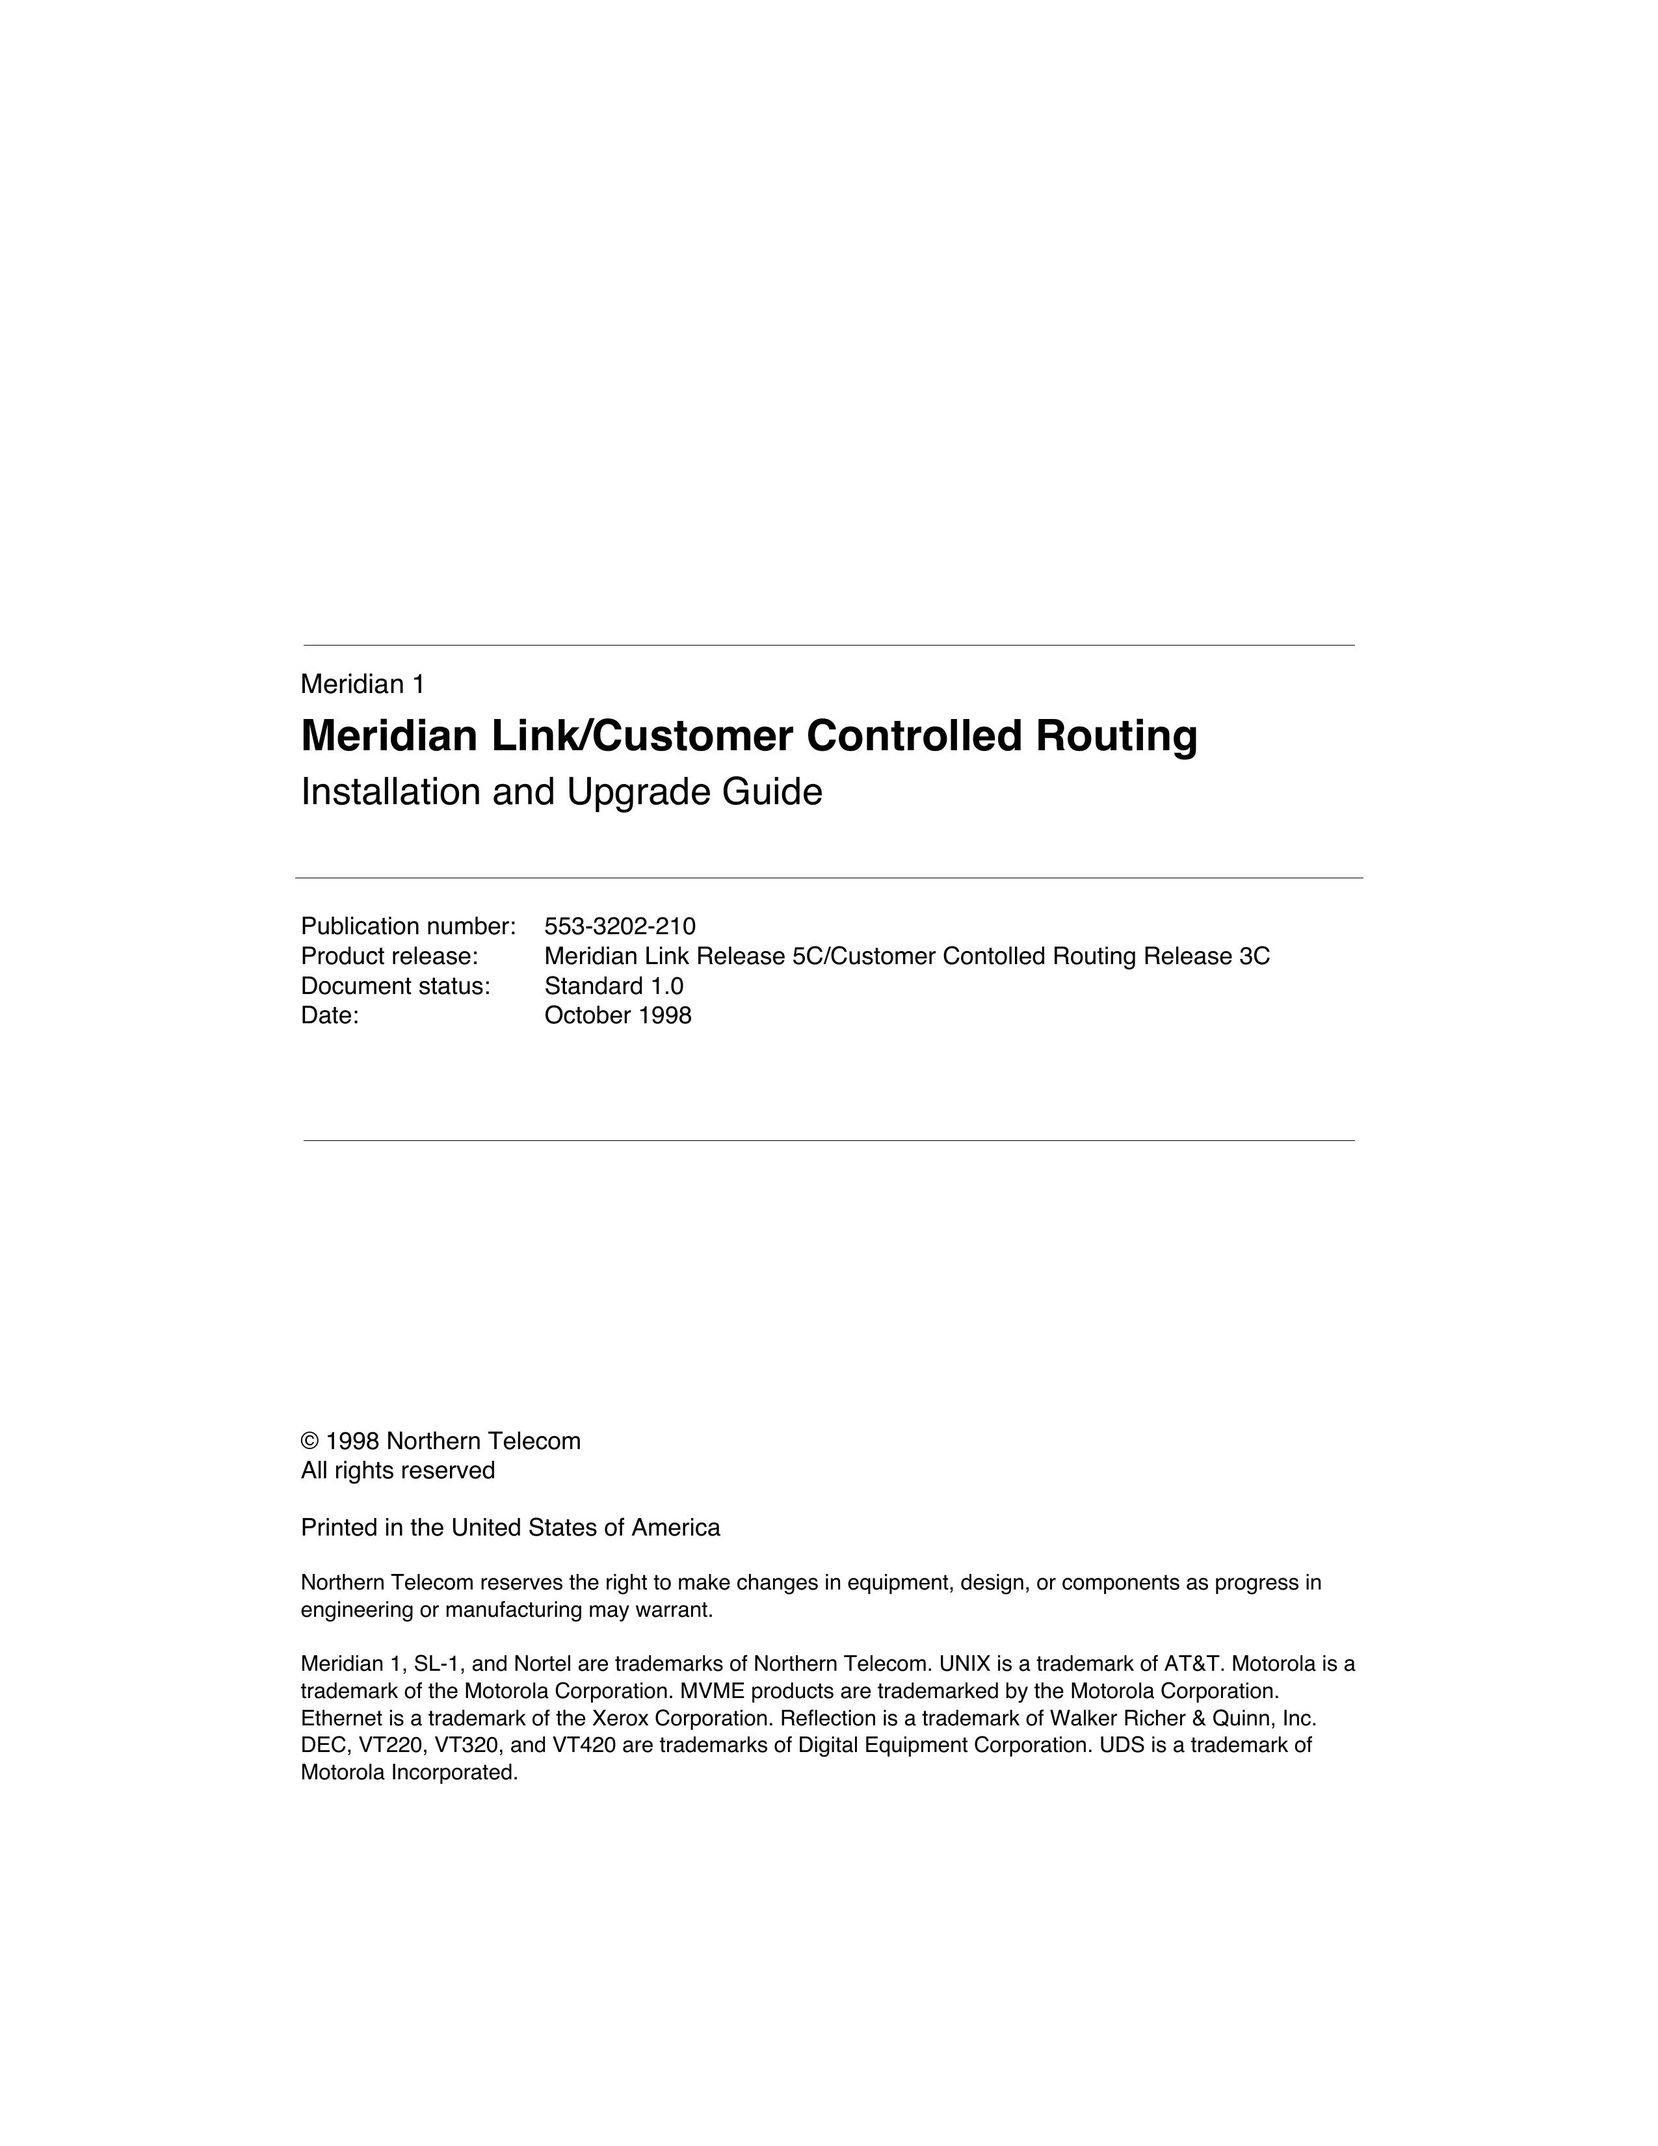 Meridian America Link/Customer Controlled Routing Network Router User Manual